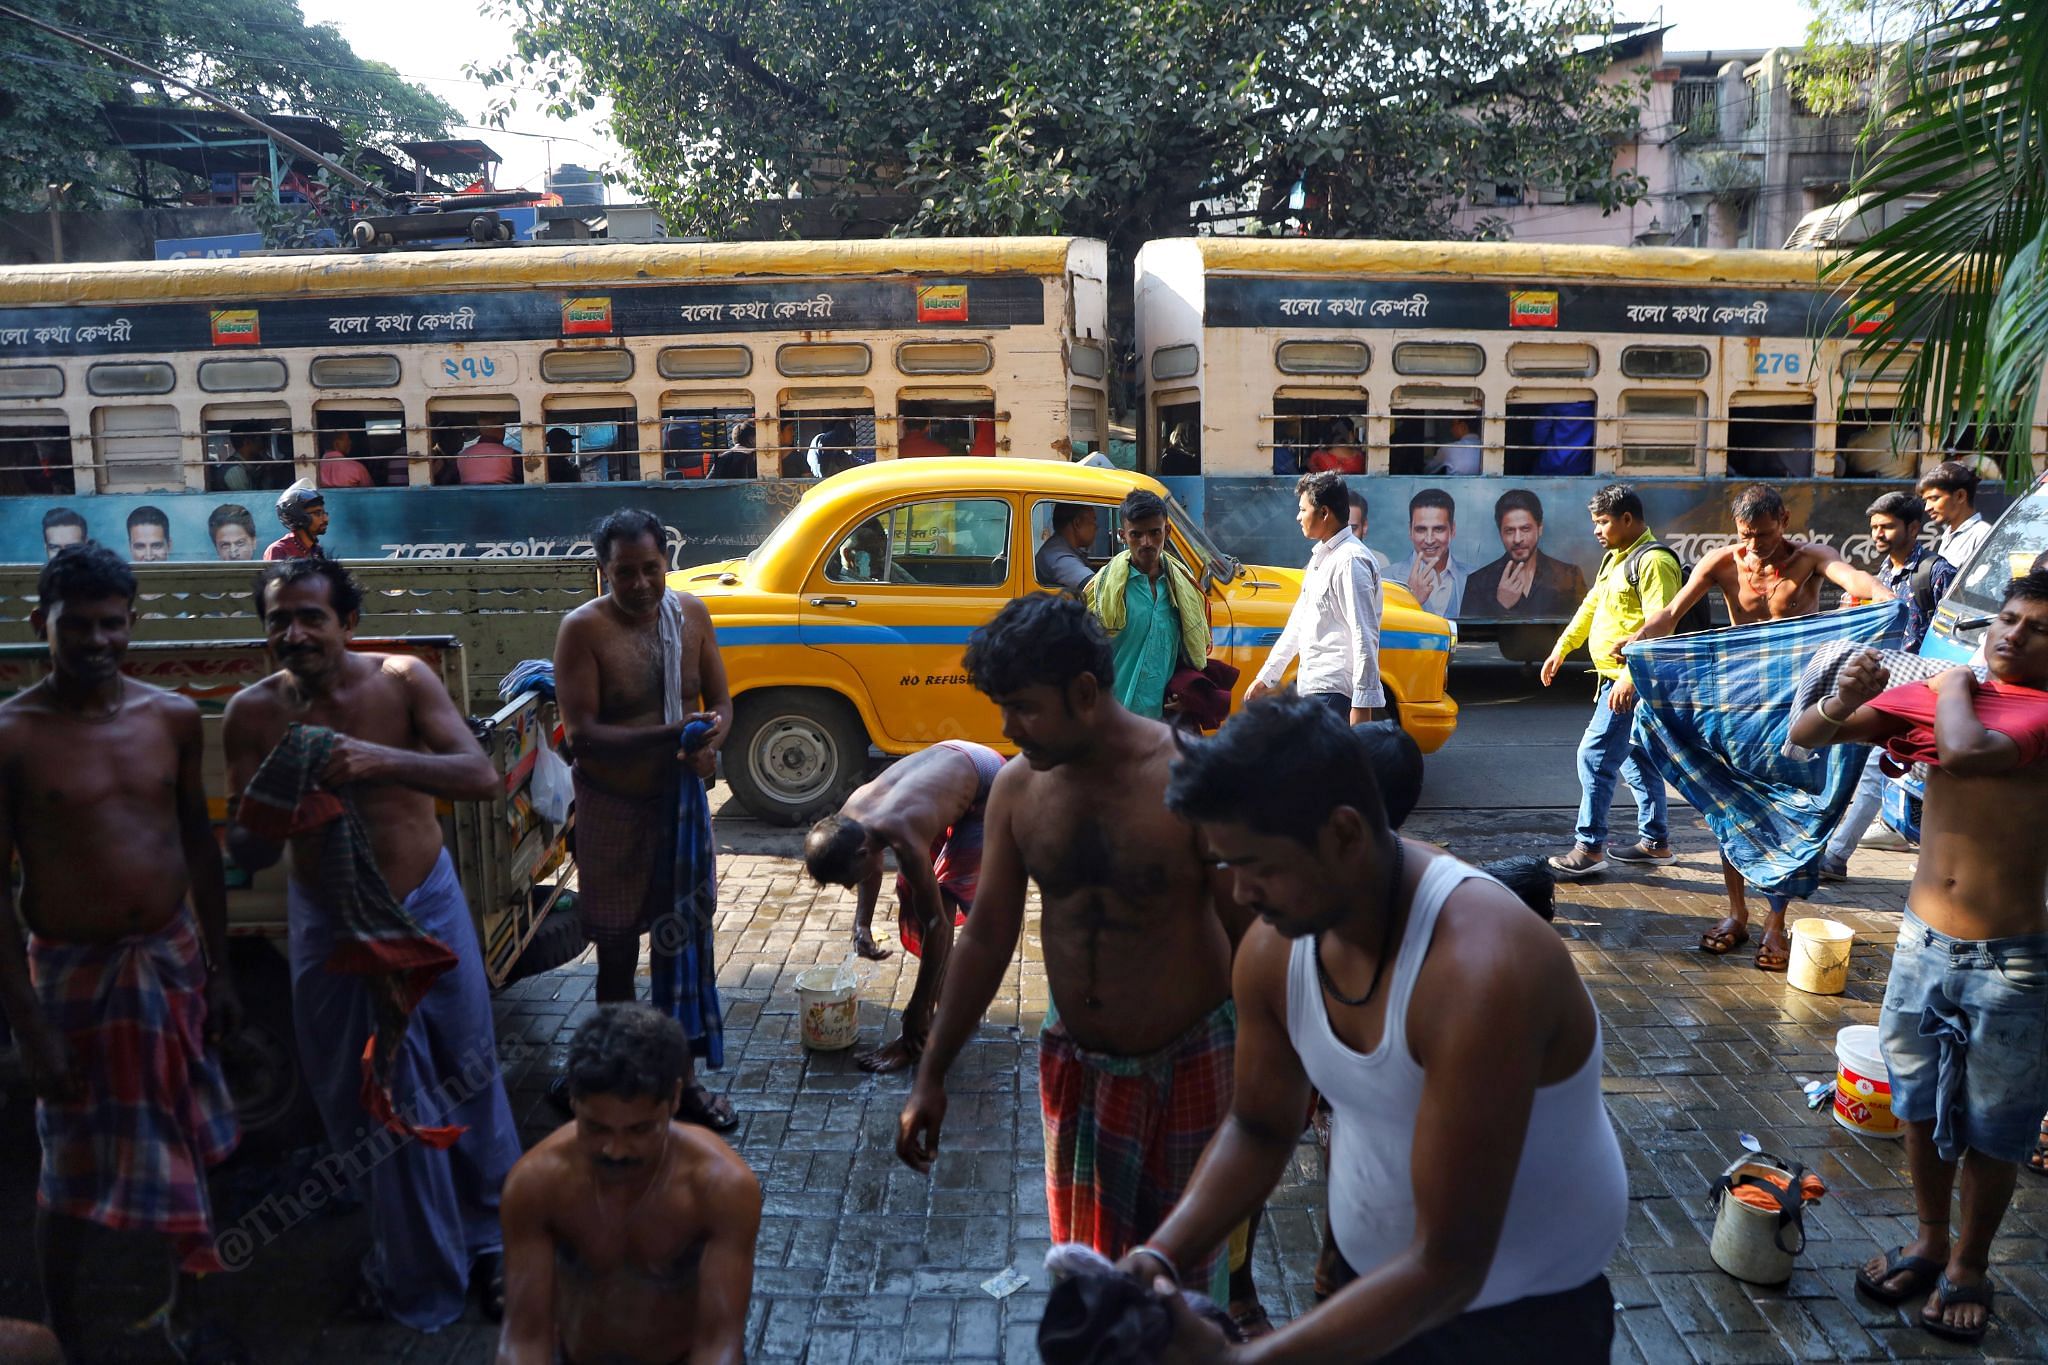 December 2022: Trams in Kolkata are dying, but these caterpillar joy rides still have a fanbase. Women find them safe and full of adventure, kids have their fun and the elderly see them as comfortable. Kolkata gets its much-praised vibe from trams. In this photo, a tram passes a busy street, where men are seen using the public bath on the sides. It defines the chaos and beauty of the city that loves the slowness life has to offer | Manisha Mondal, ThePrint